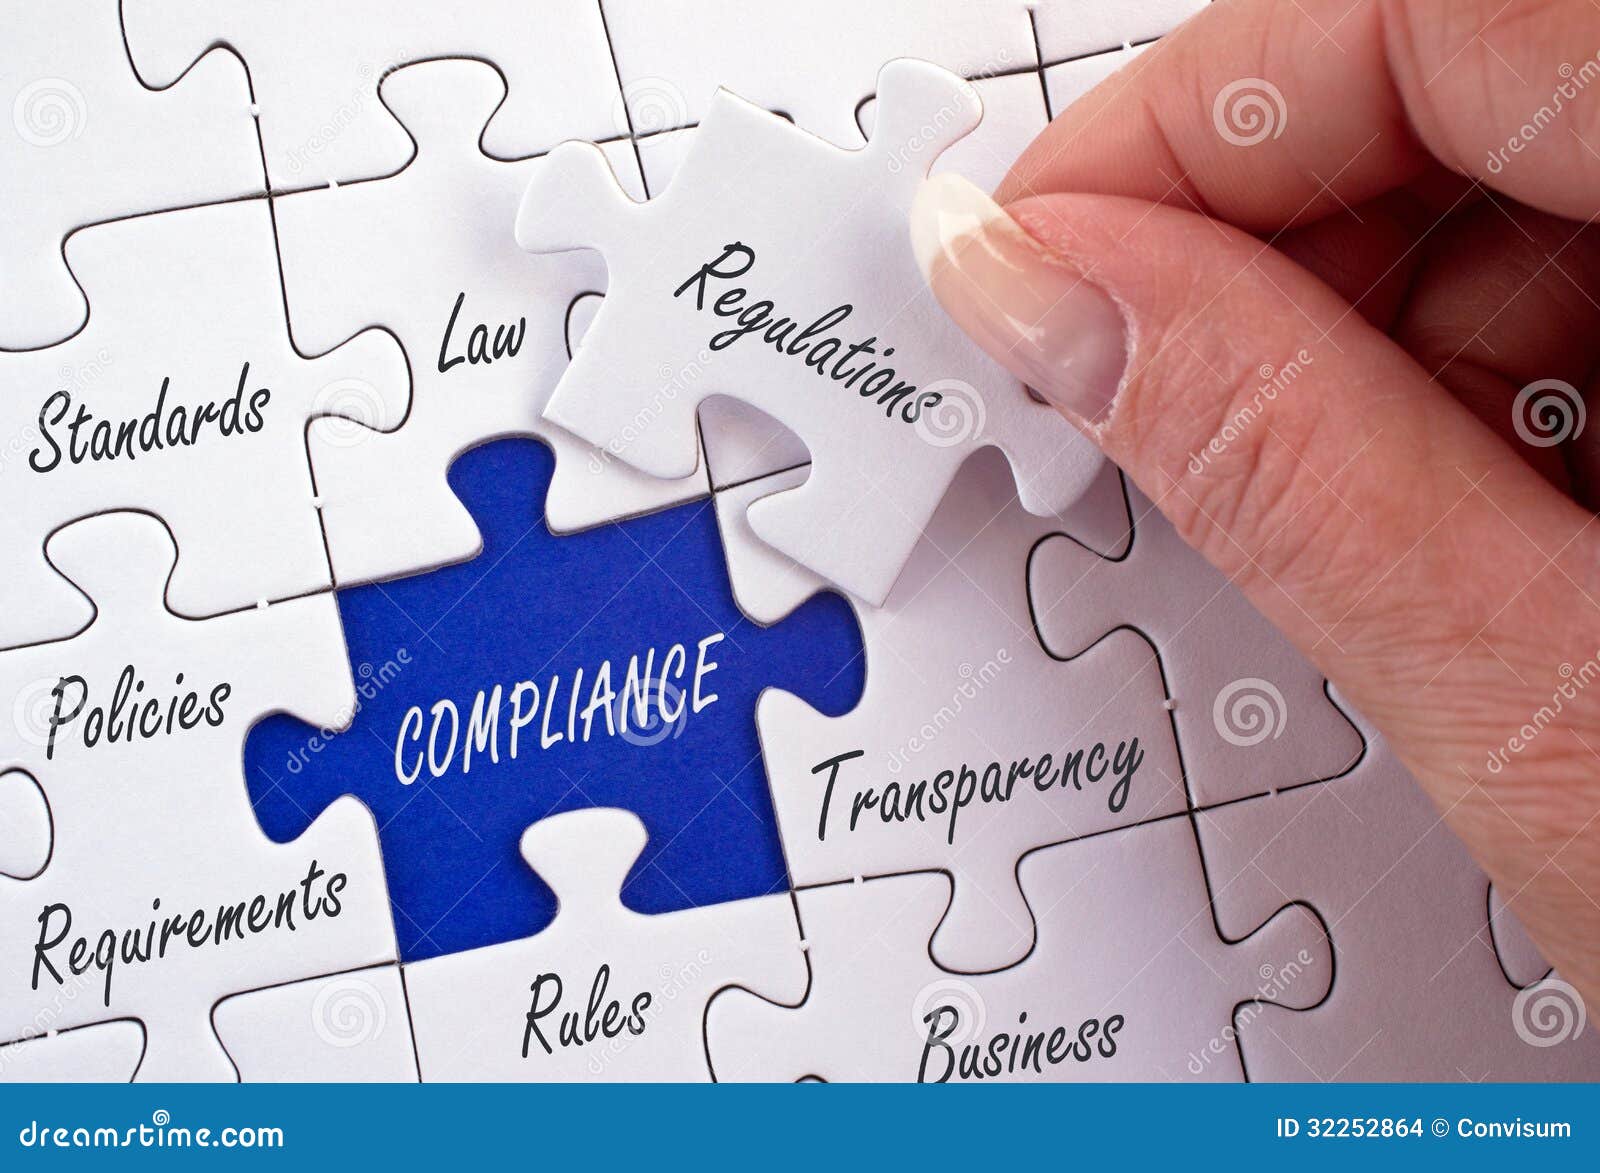 compliance and regulations or policies jigsaw